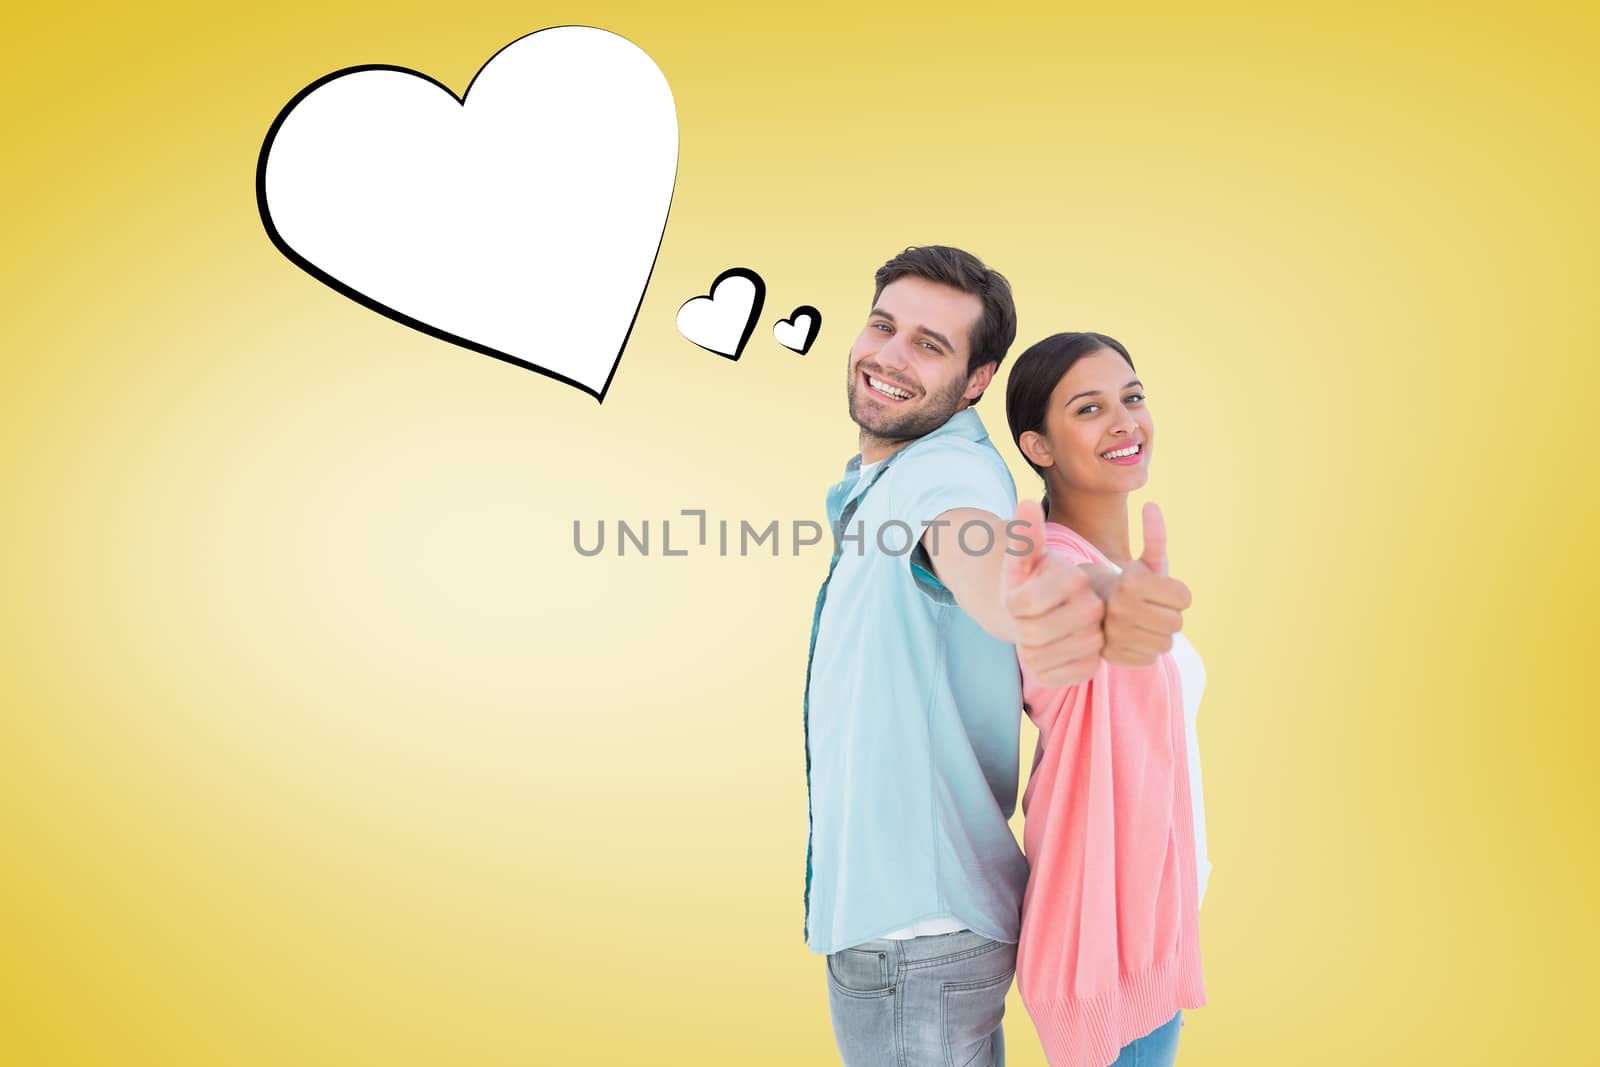 Happy couple showing thumbs up against yellow vignette